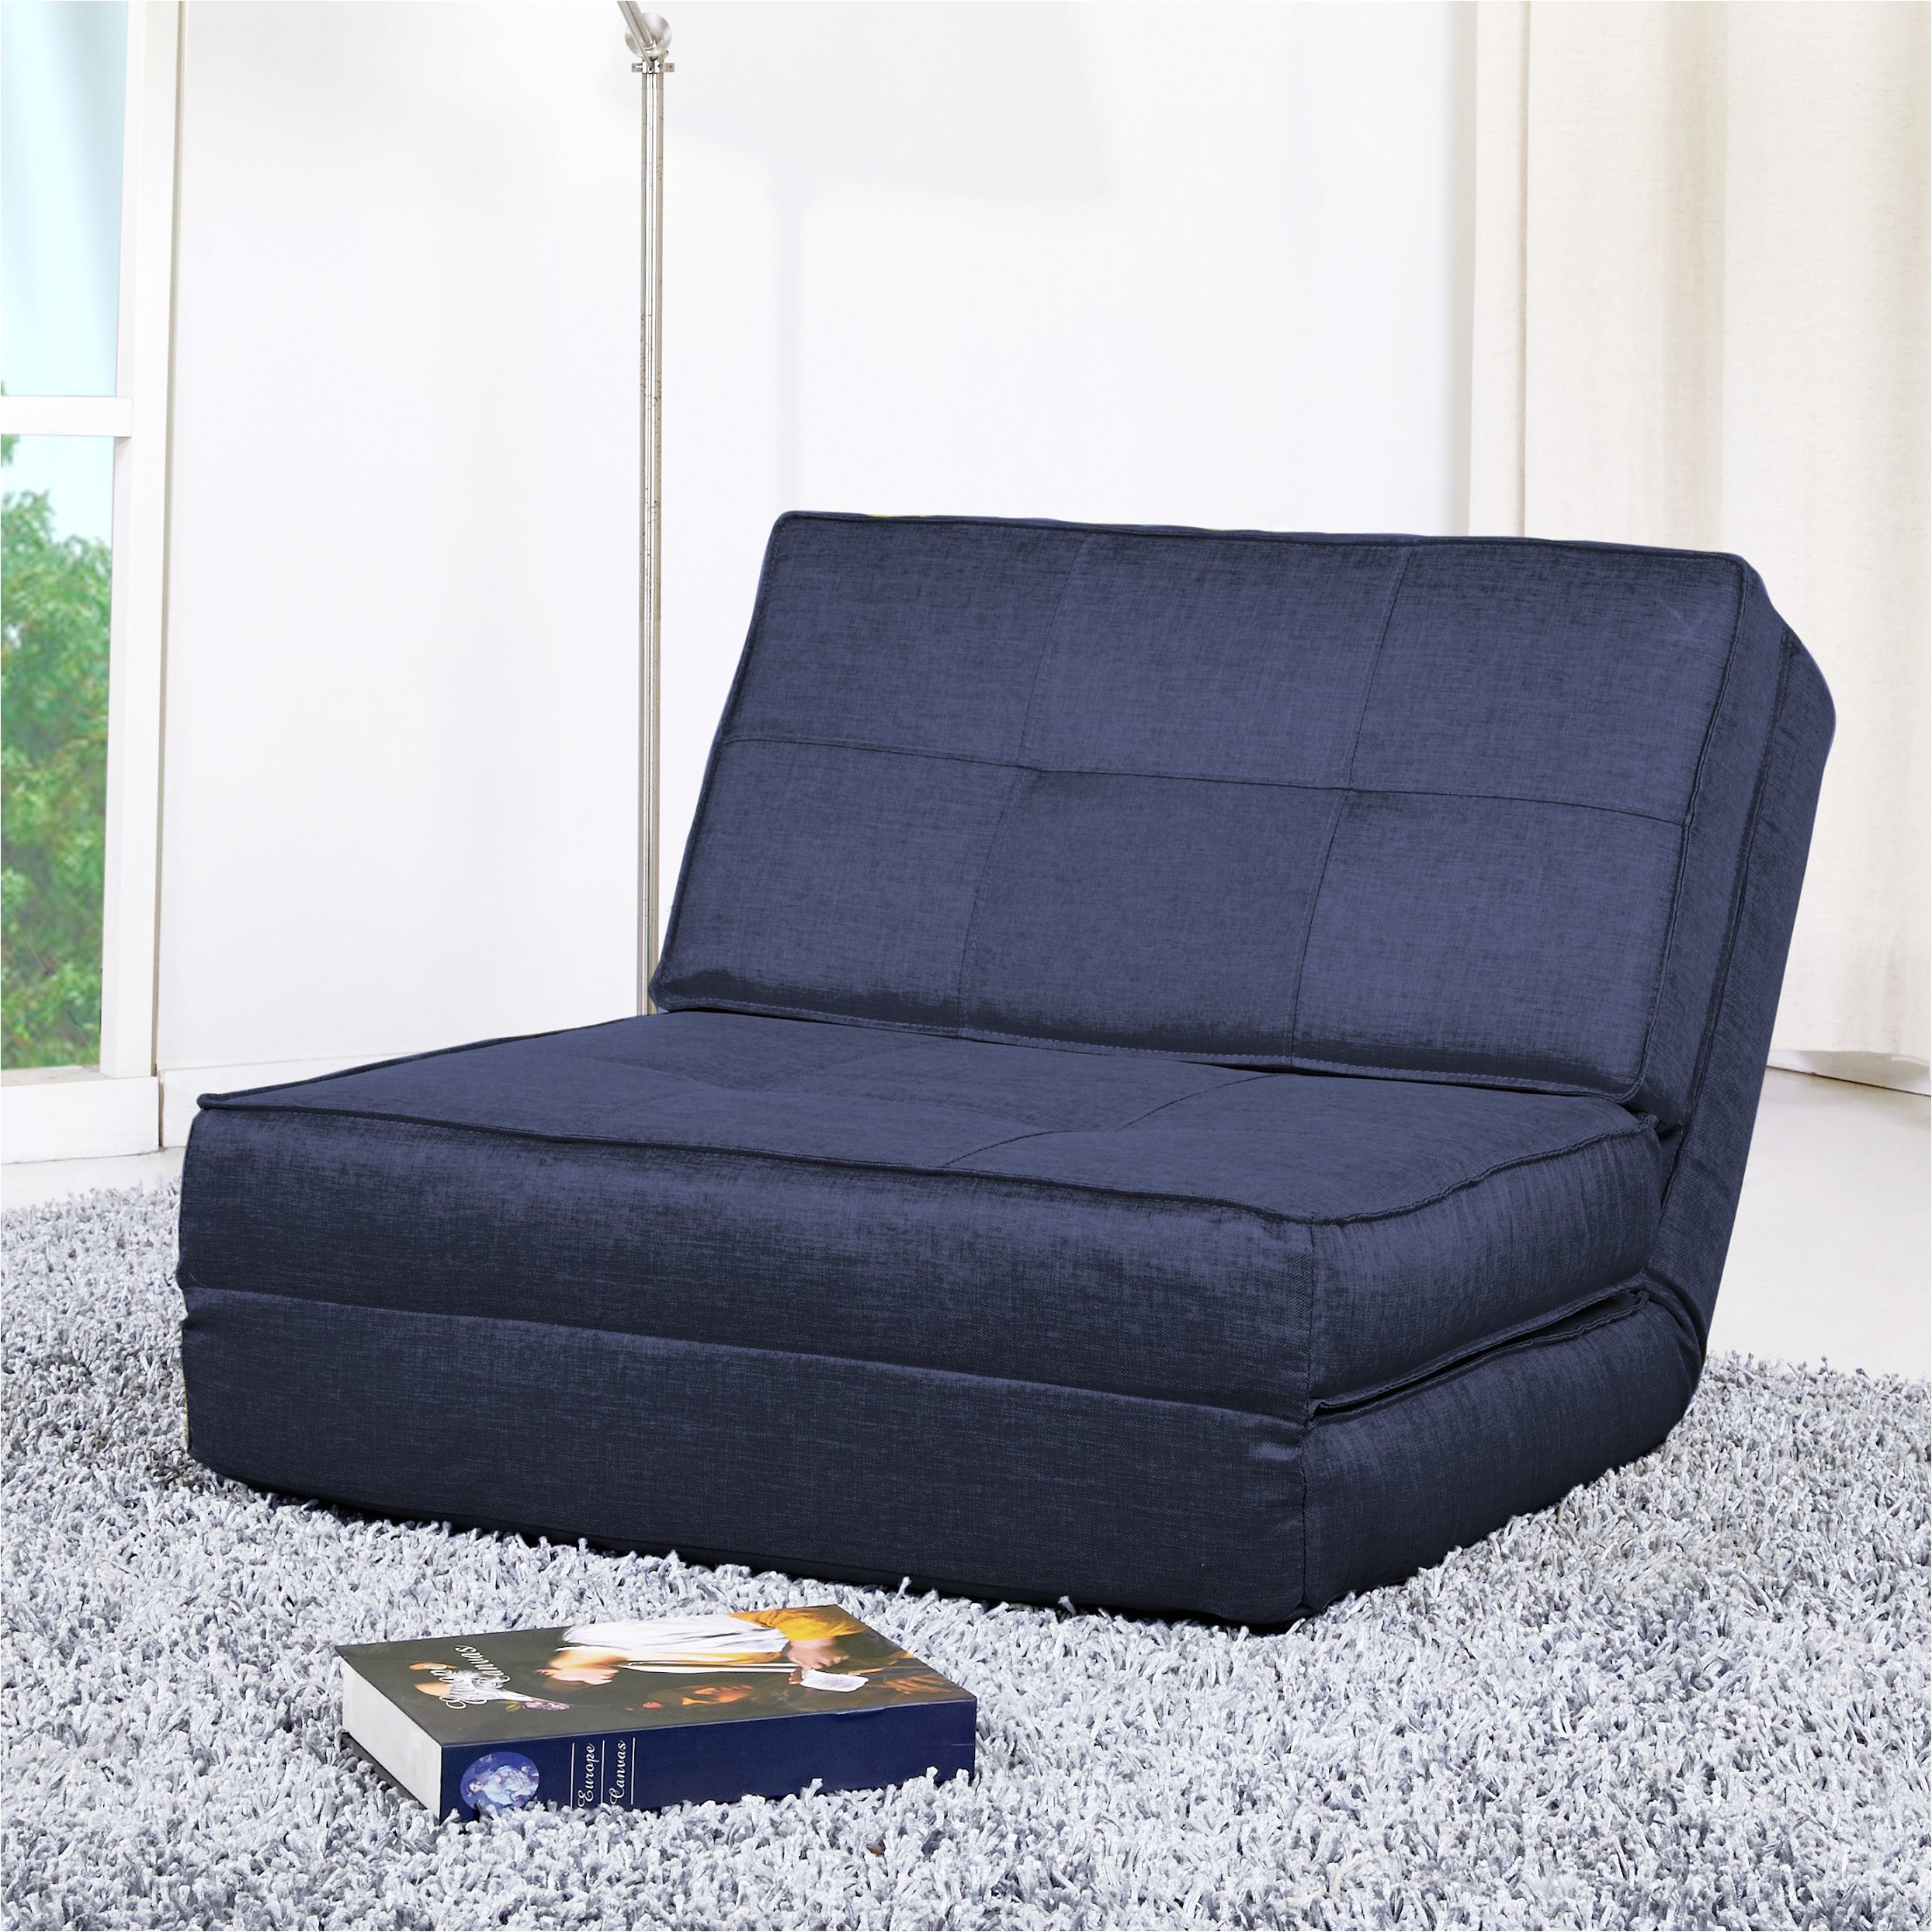 full size of futon gallery of awesome wayfair futon picture design furniture serta futons anderson